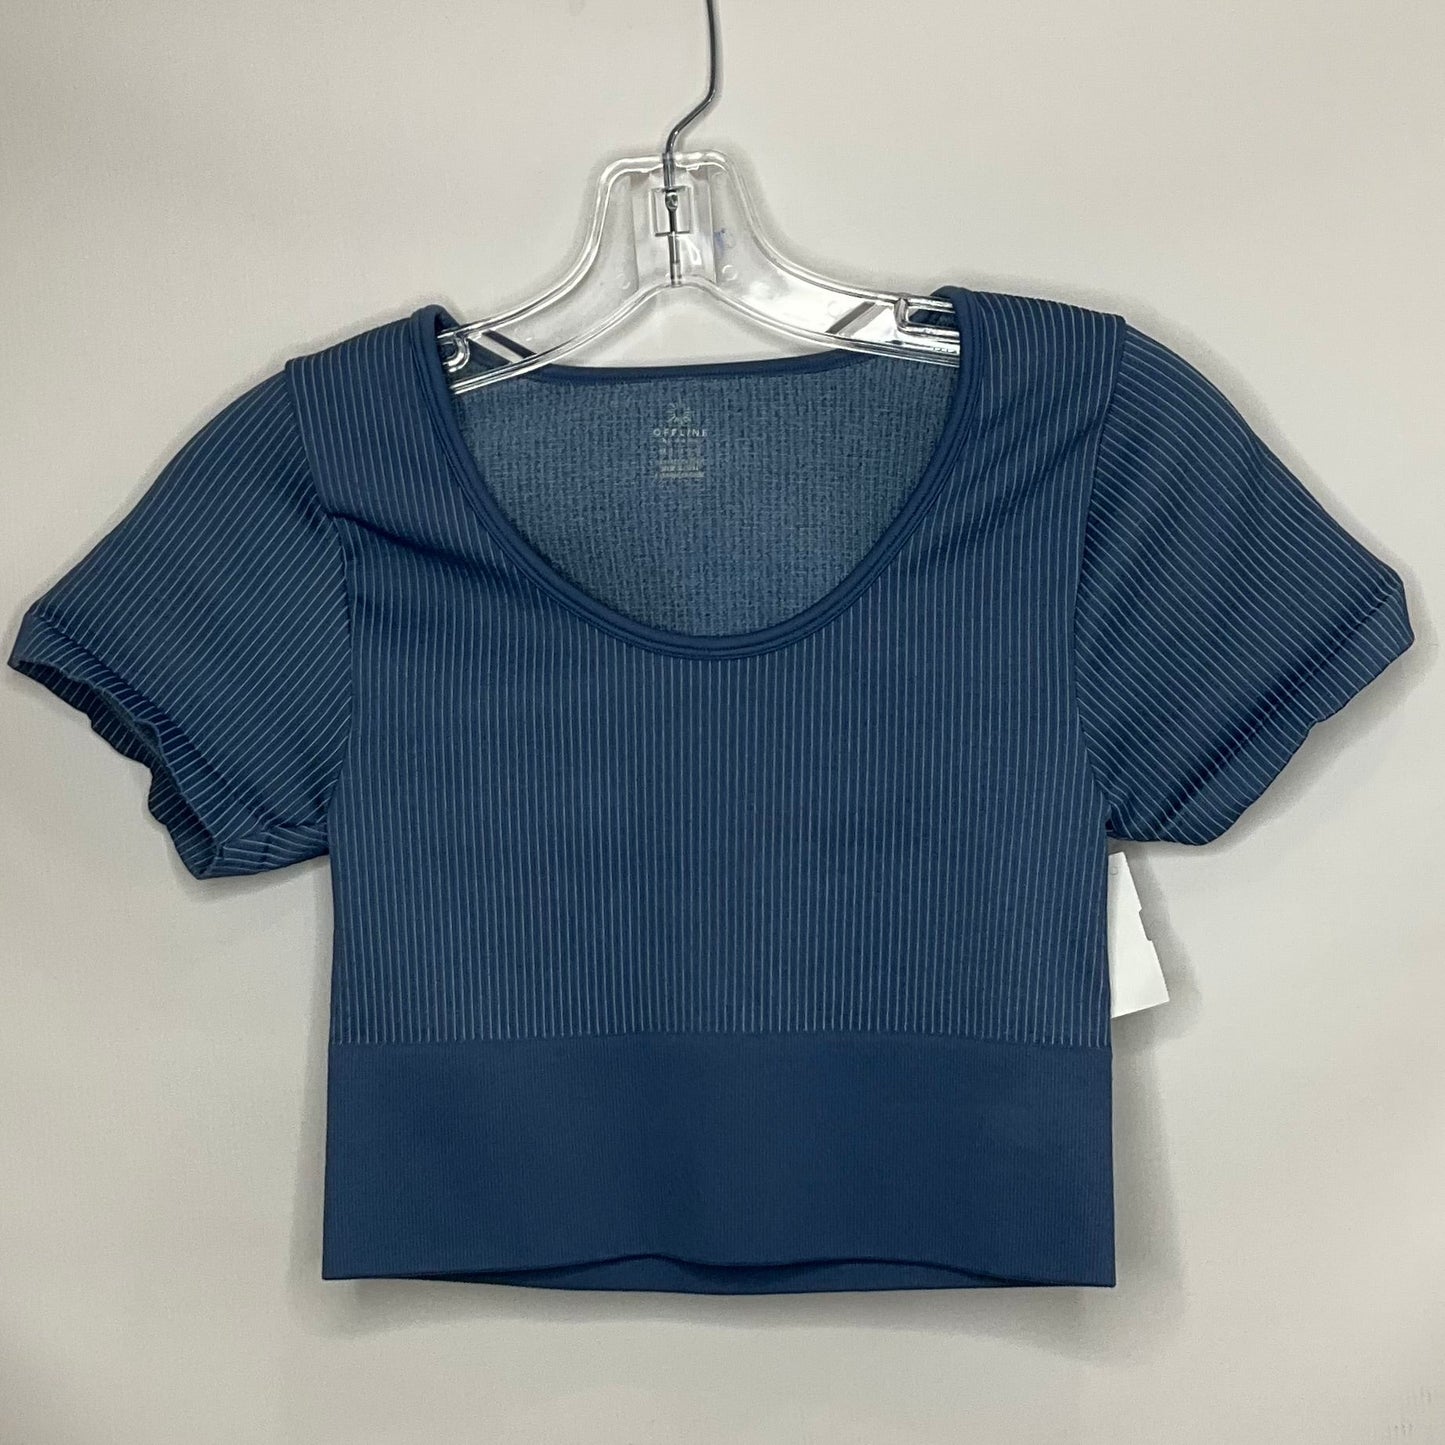 Blue Athletic Top Short Sleeve Aerie, Size M